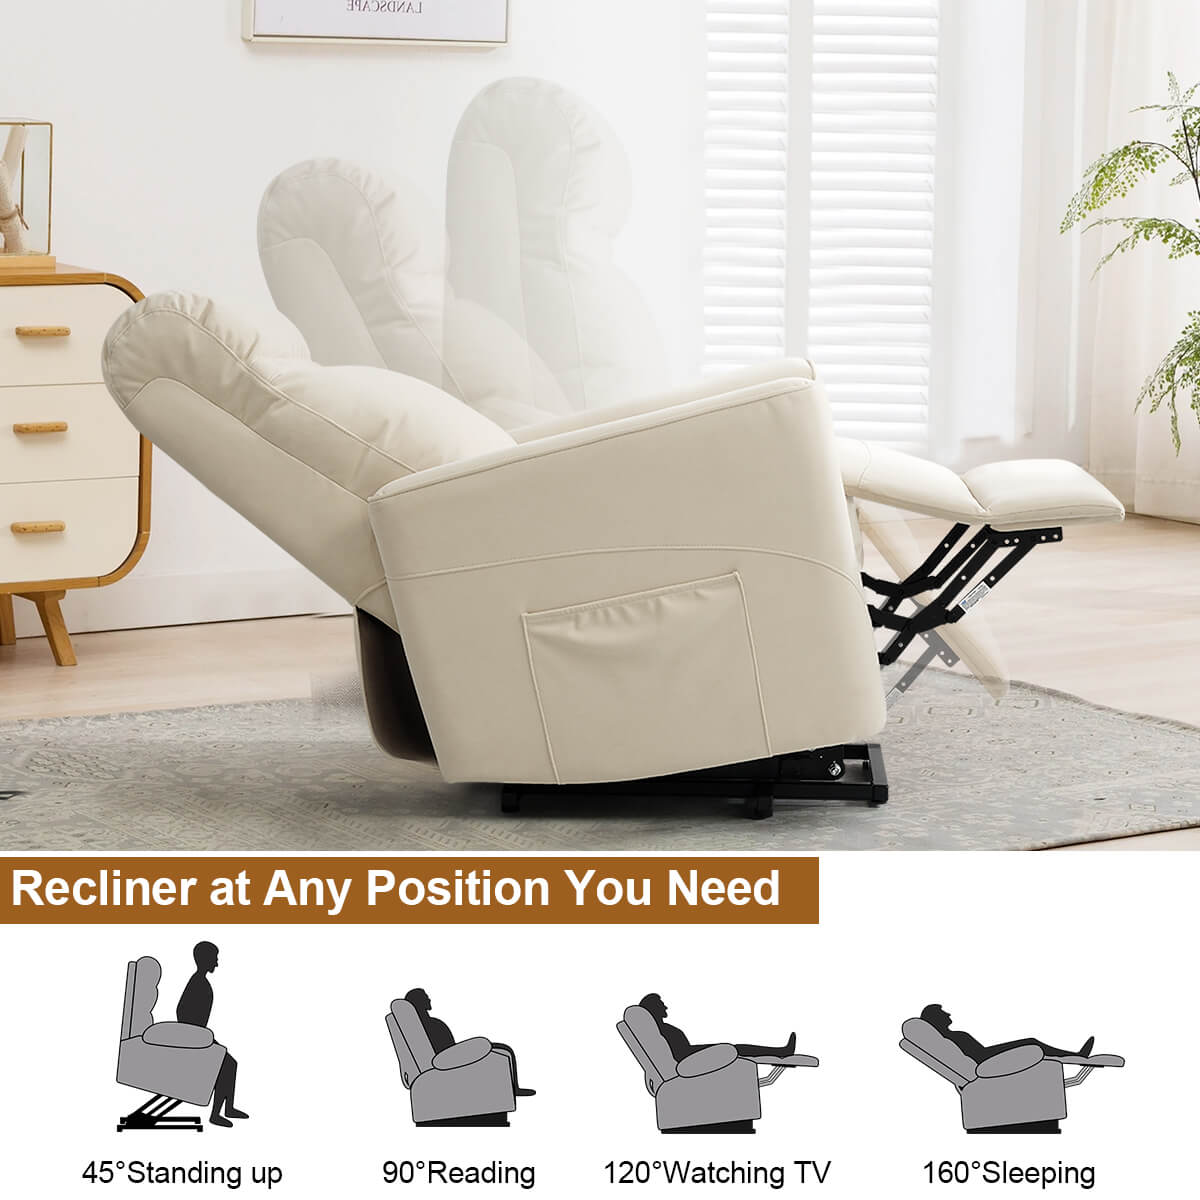 Soulout 8022 Power Lift Chair will recline any position